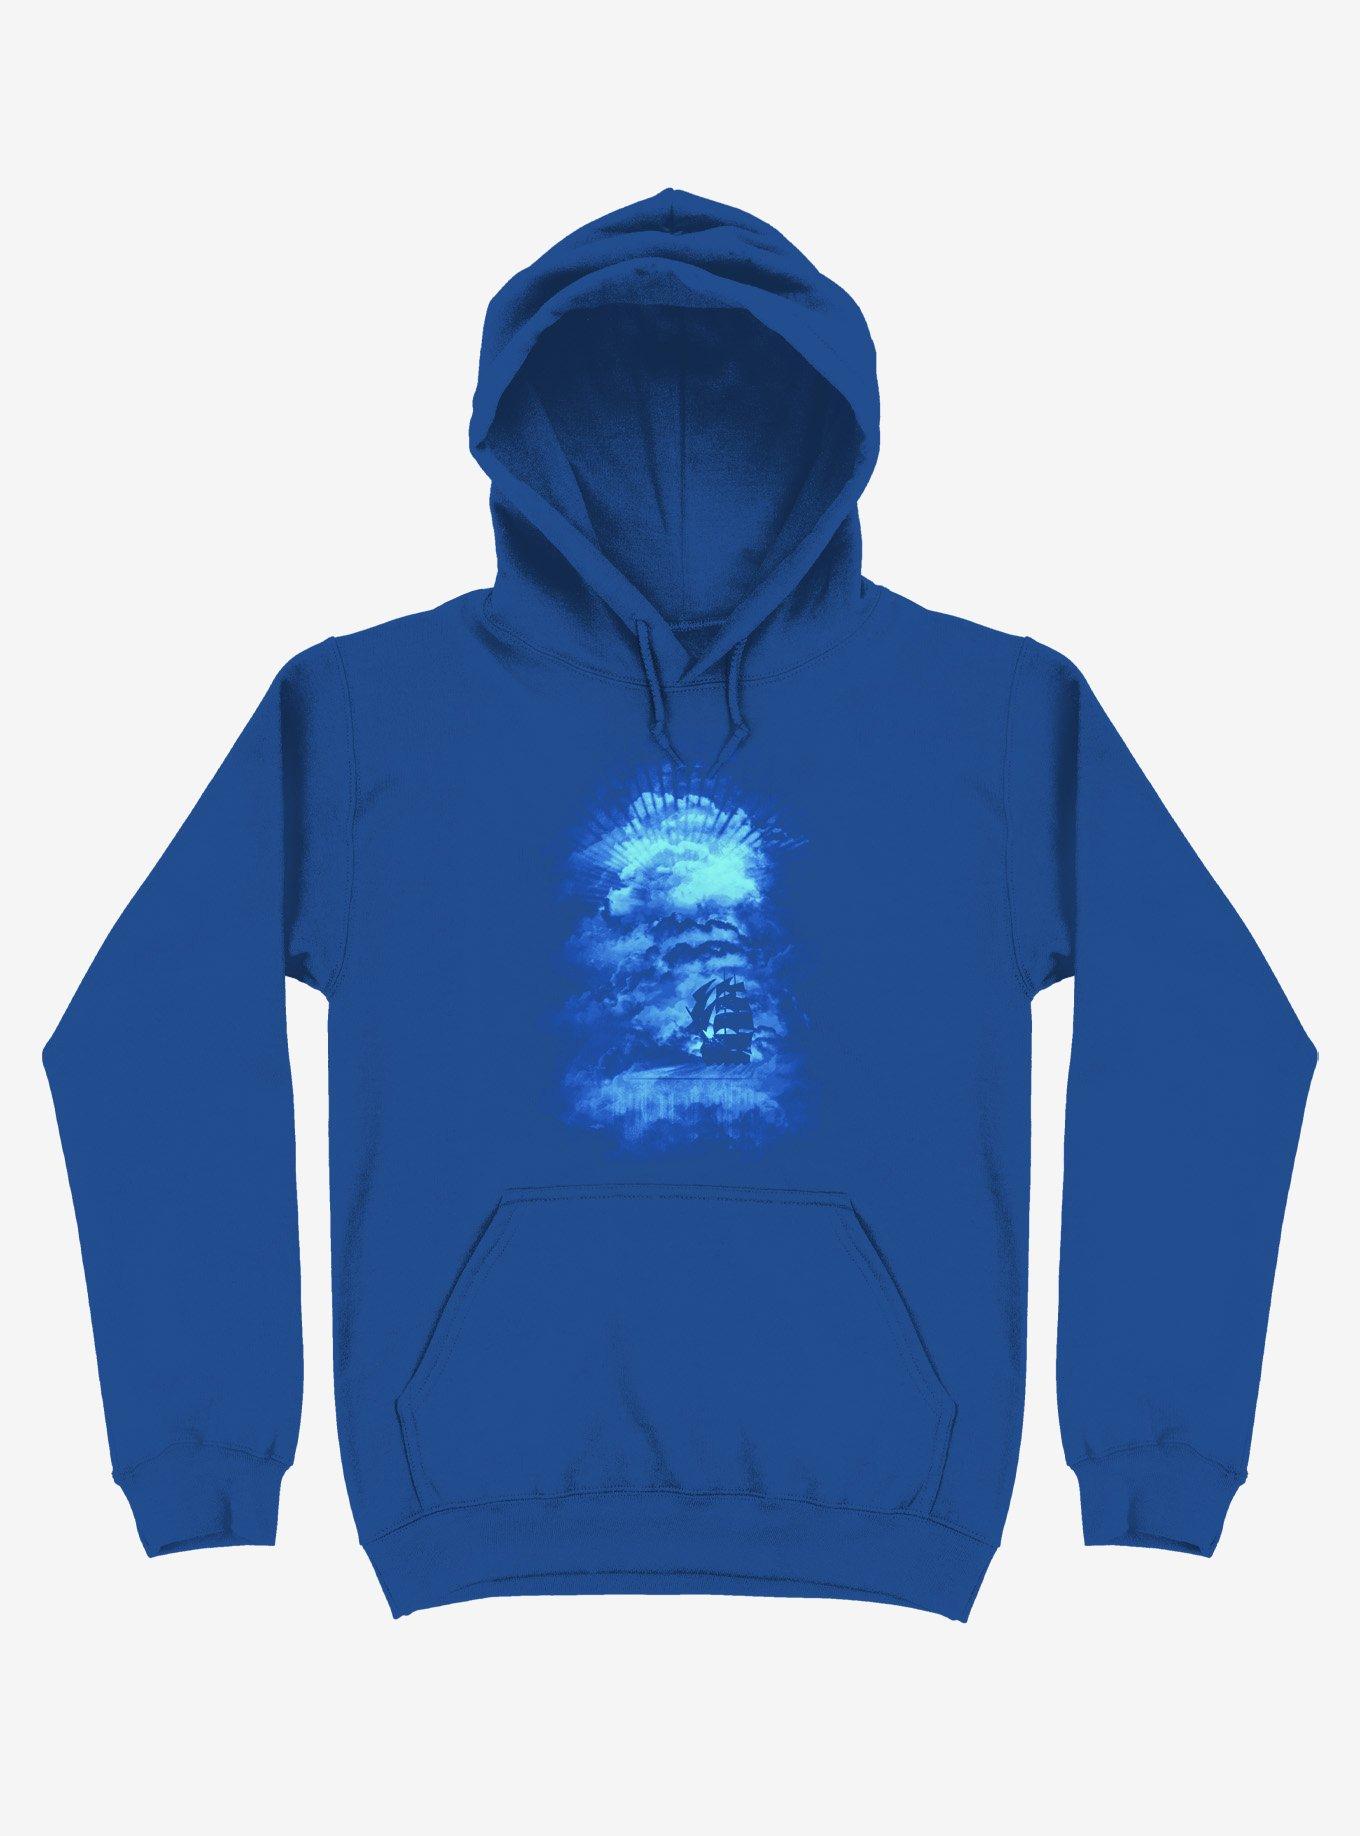 Ship Sailing To The End Of The Bright World Royal Blue Hoodie - BLUE ...